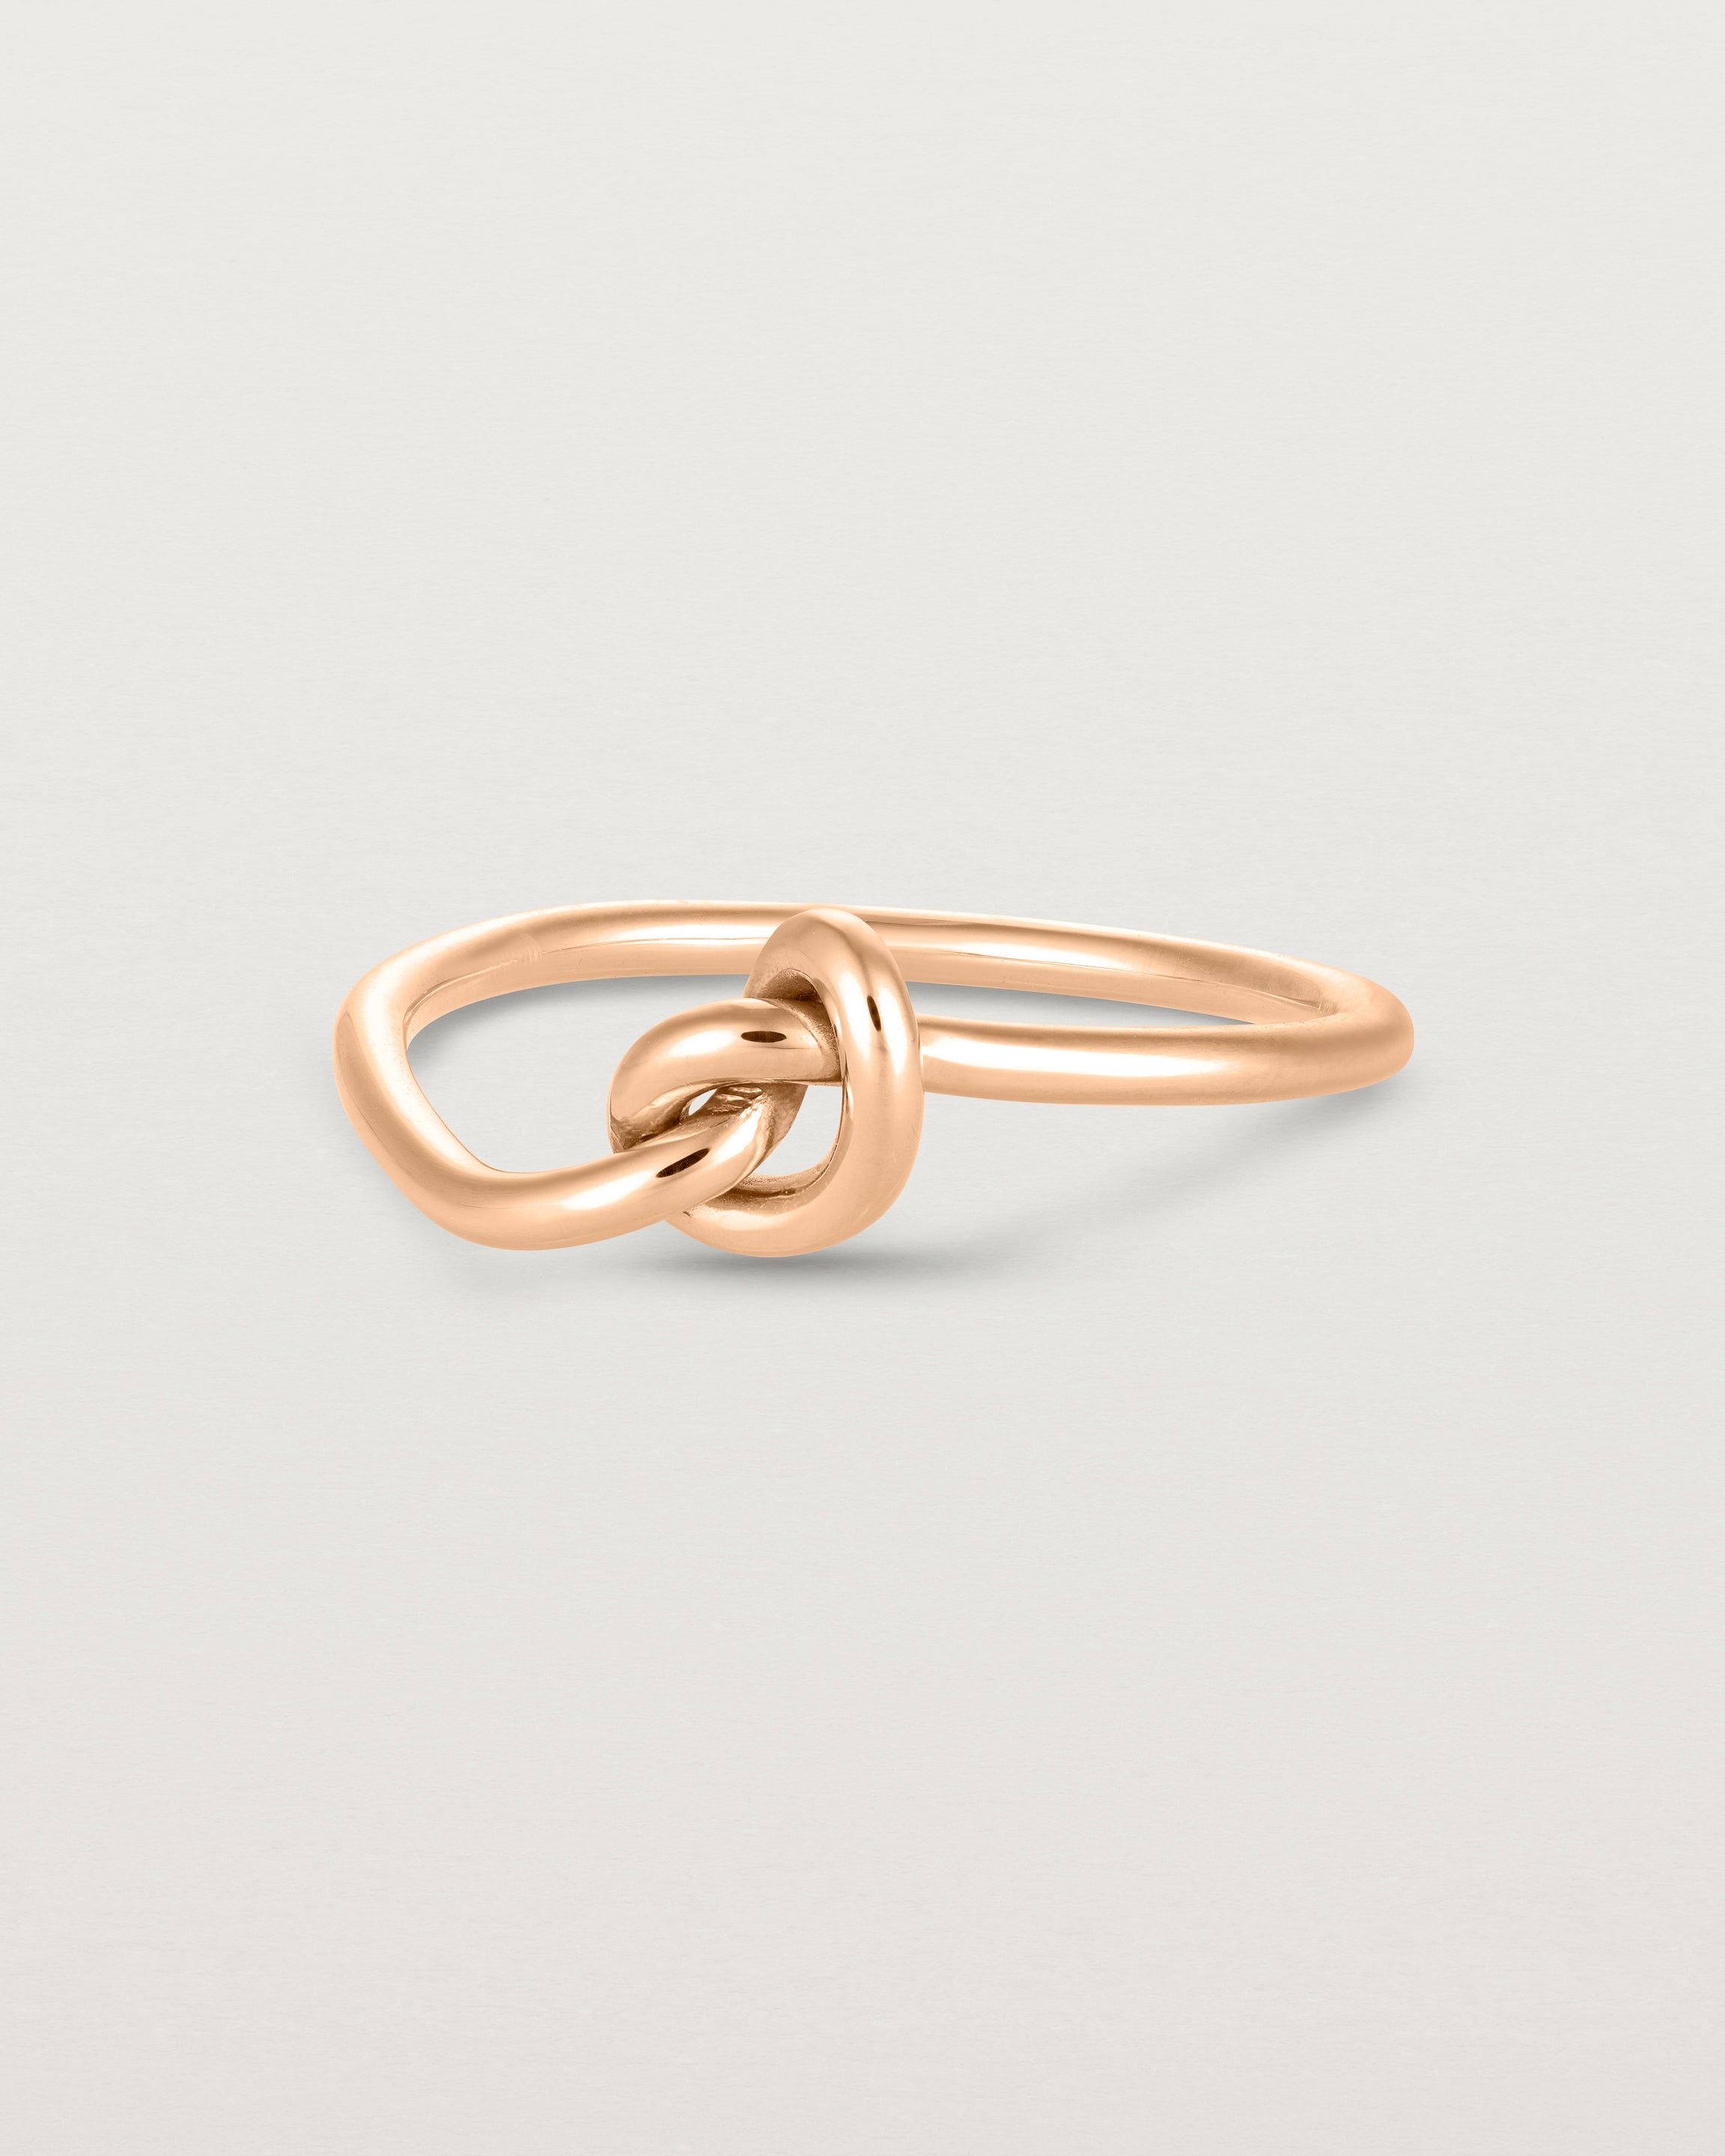 Front view of the Cara Ring in rose gold.